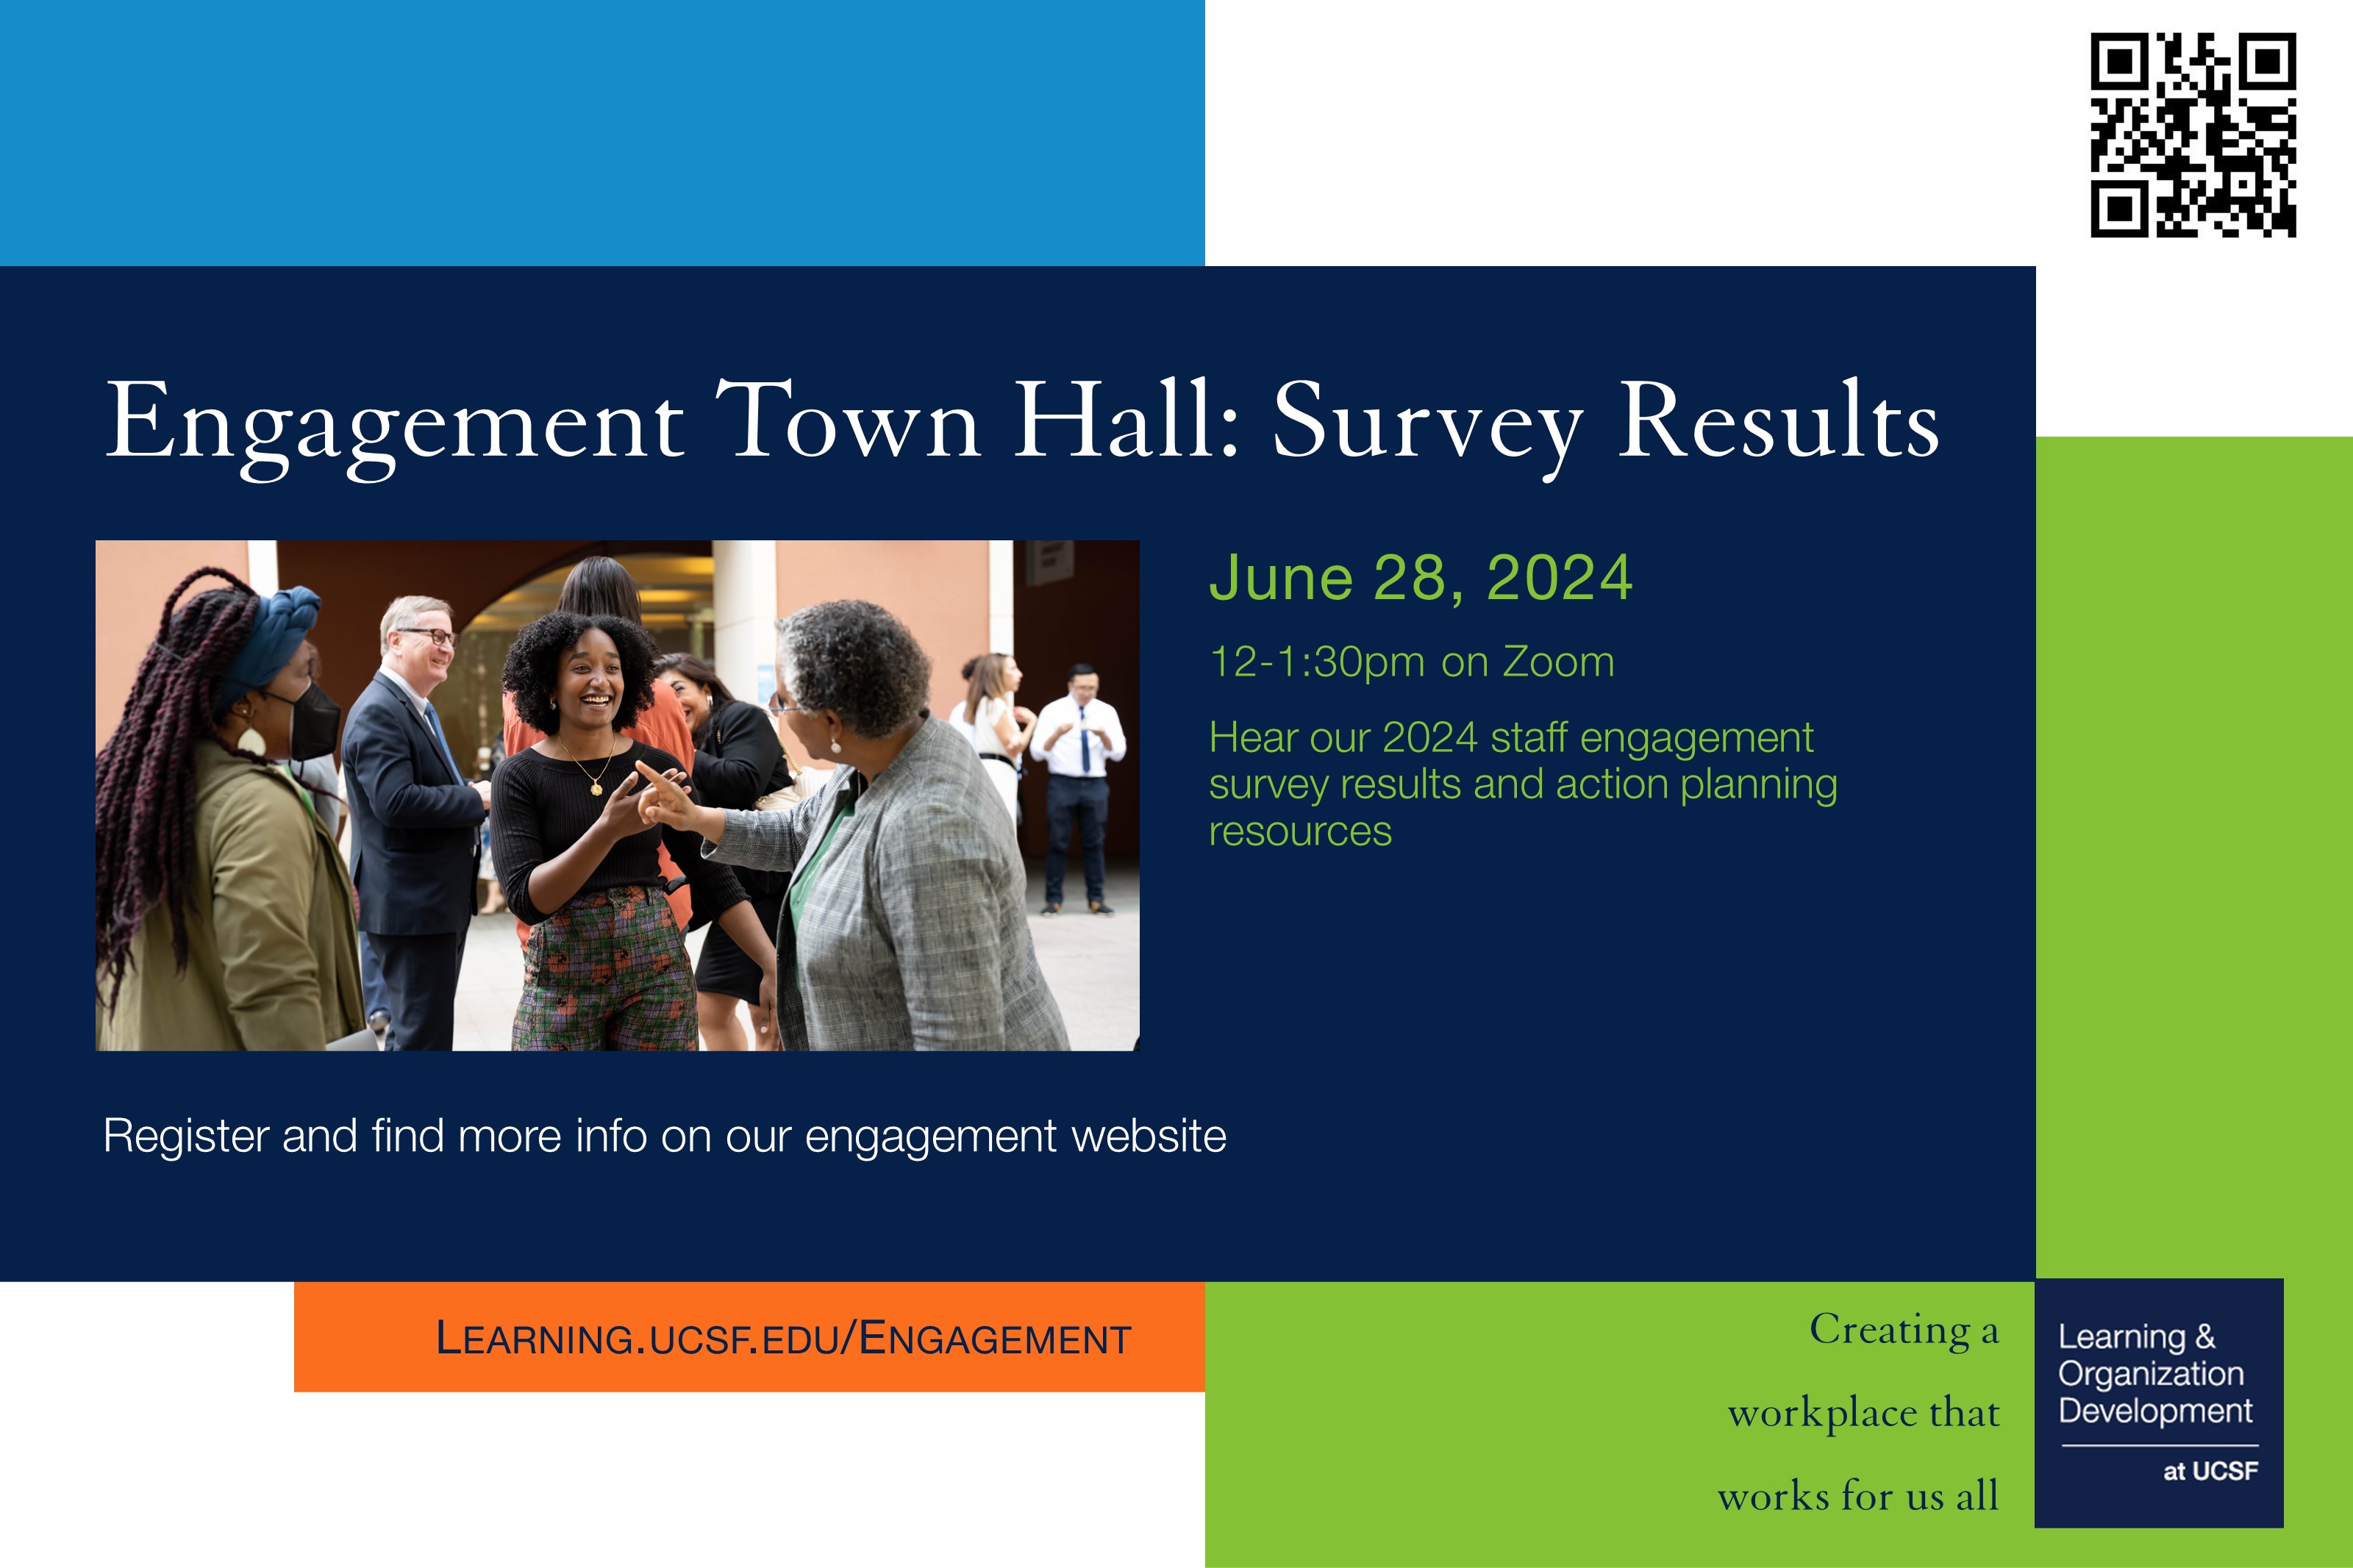 Engagement Town Hall: Survey Results: June 28, 2024, 12-1:30pm, Virtual Zoom Event, Register on our Engagement website tiny.ucsf.edu/engagement